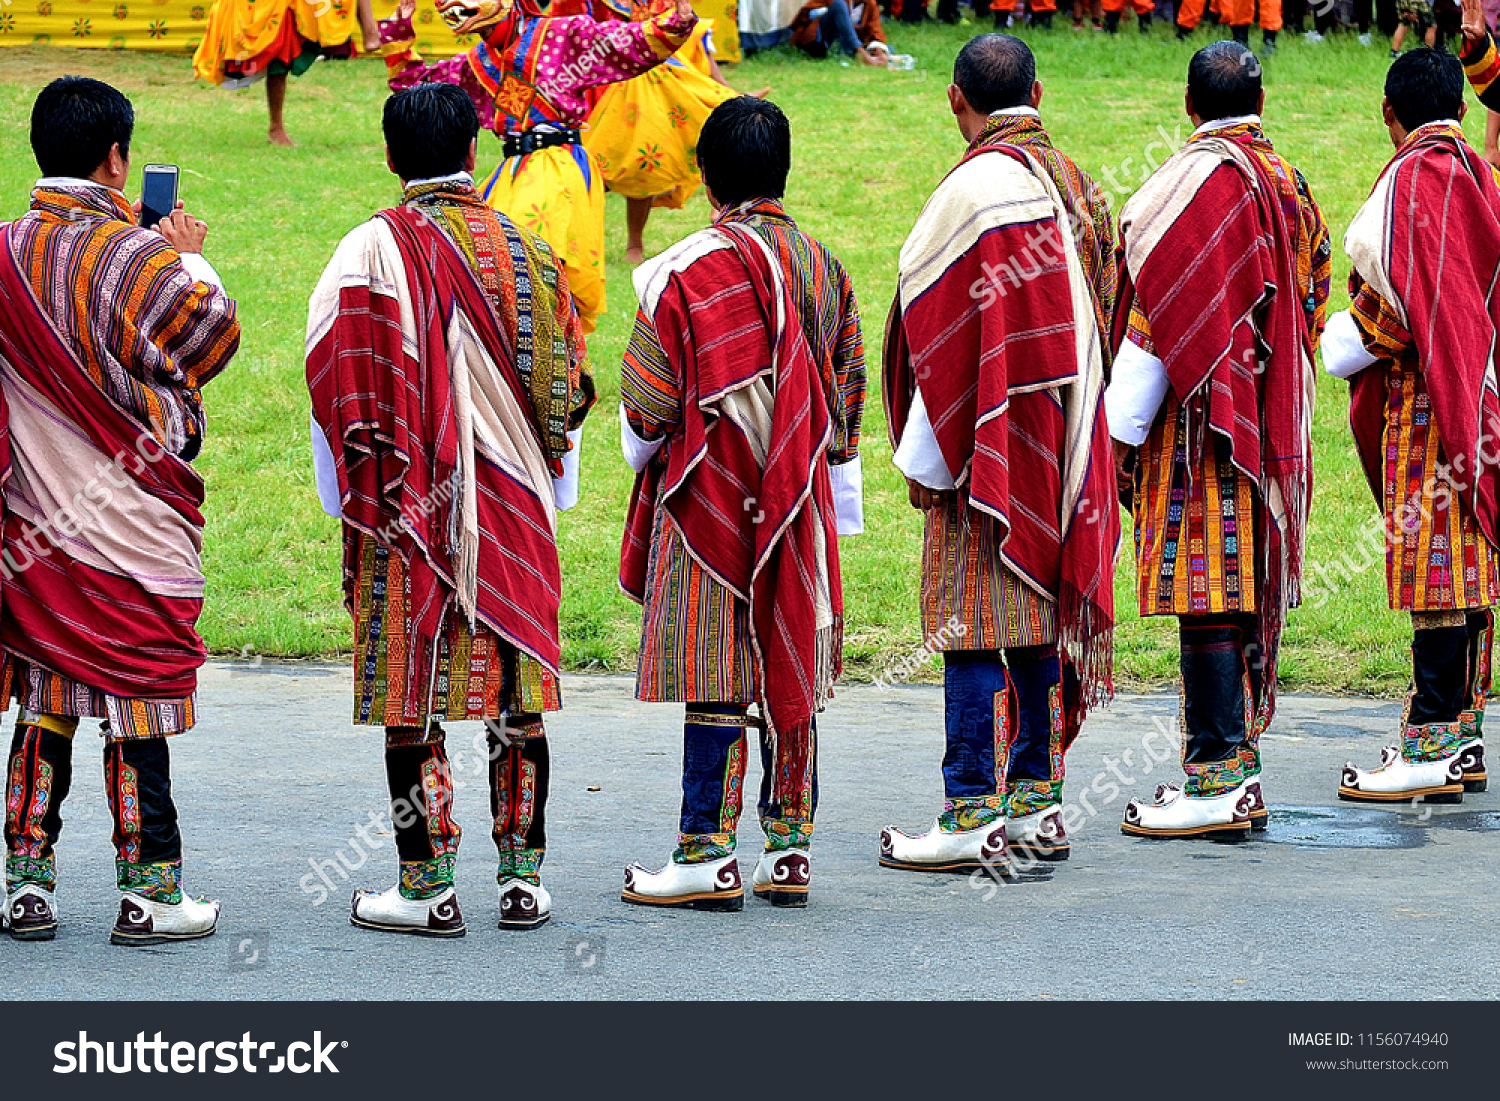 Bhutanese men in their best traditional attire. Bhutanese are fond of their unique dress which they proudly wear at all times. Shown in the picture is Bhutanese clergy men in their formal dress. #1156074940